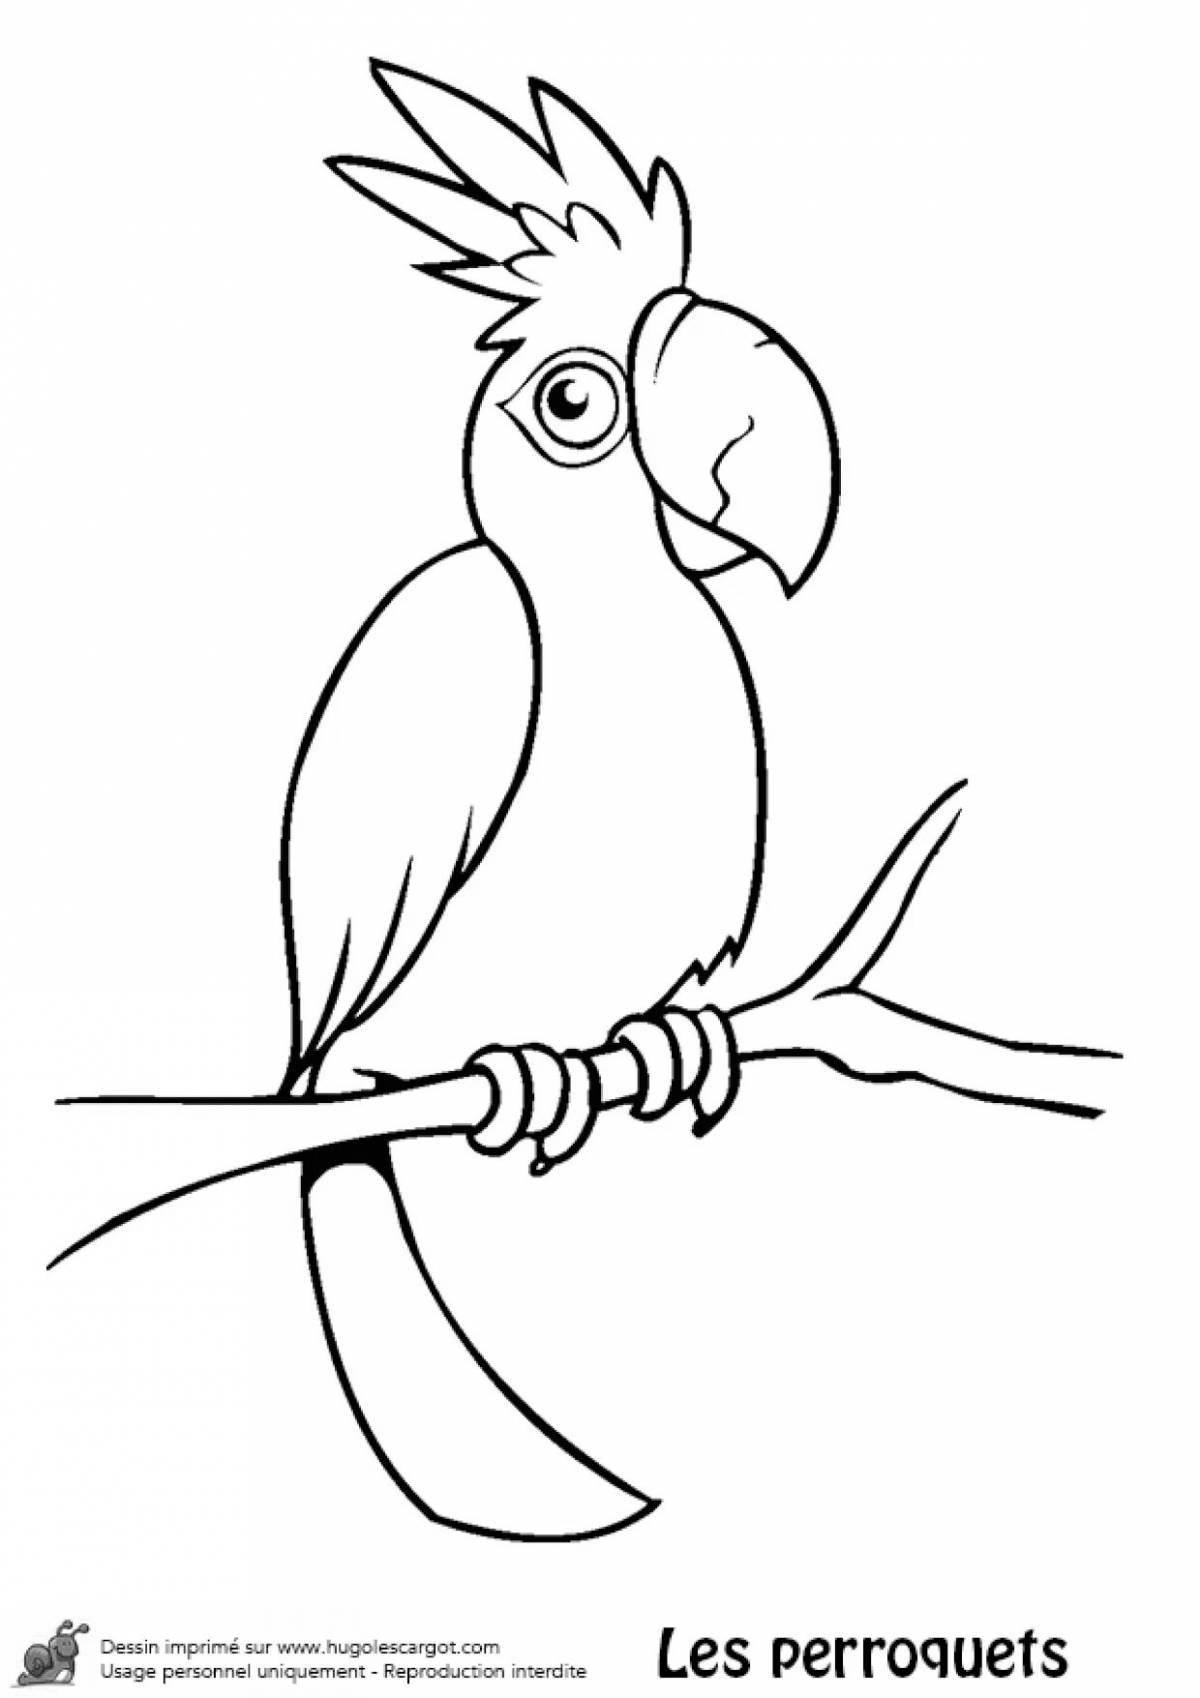 Magic parrot coloring book for kids